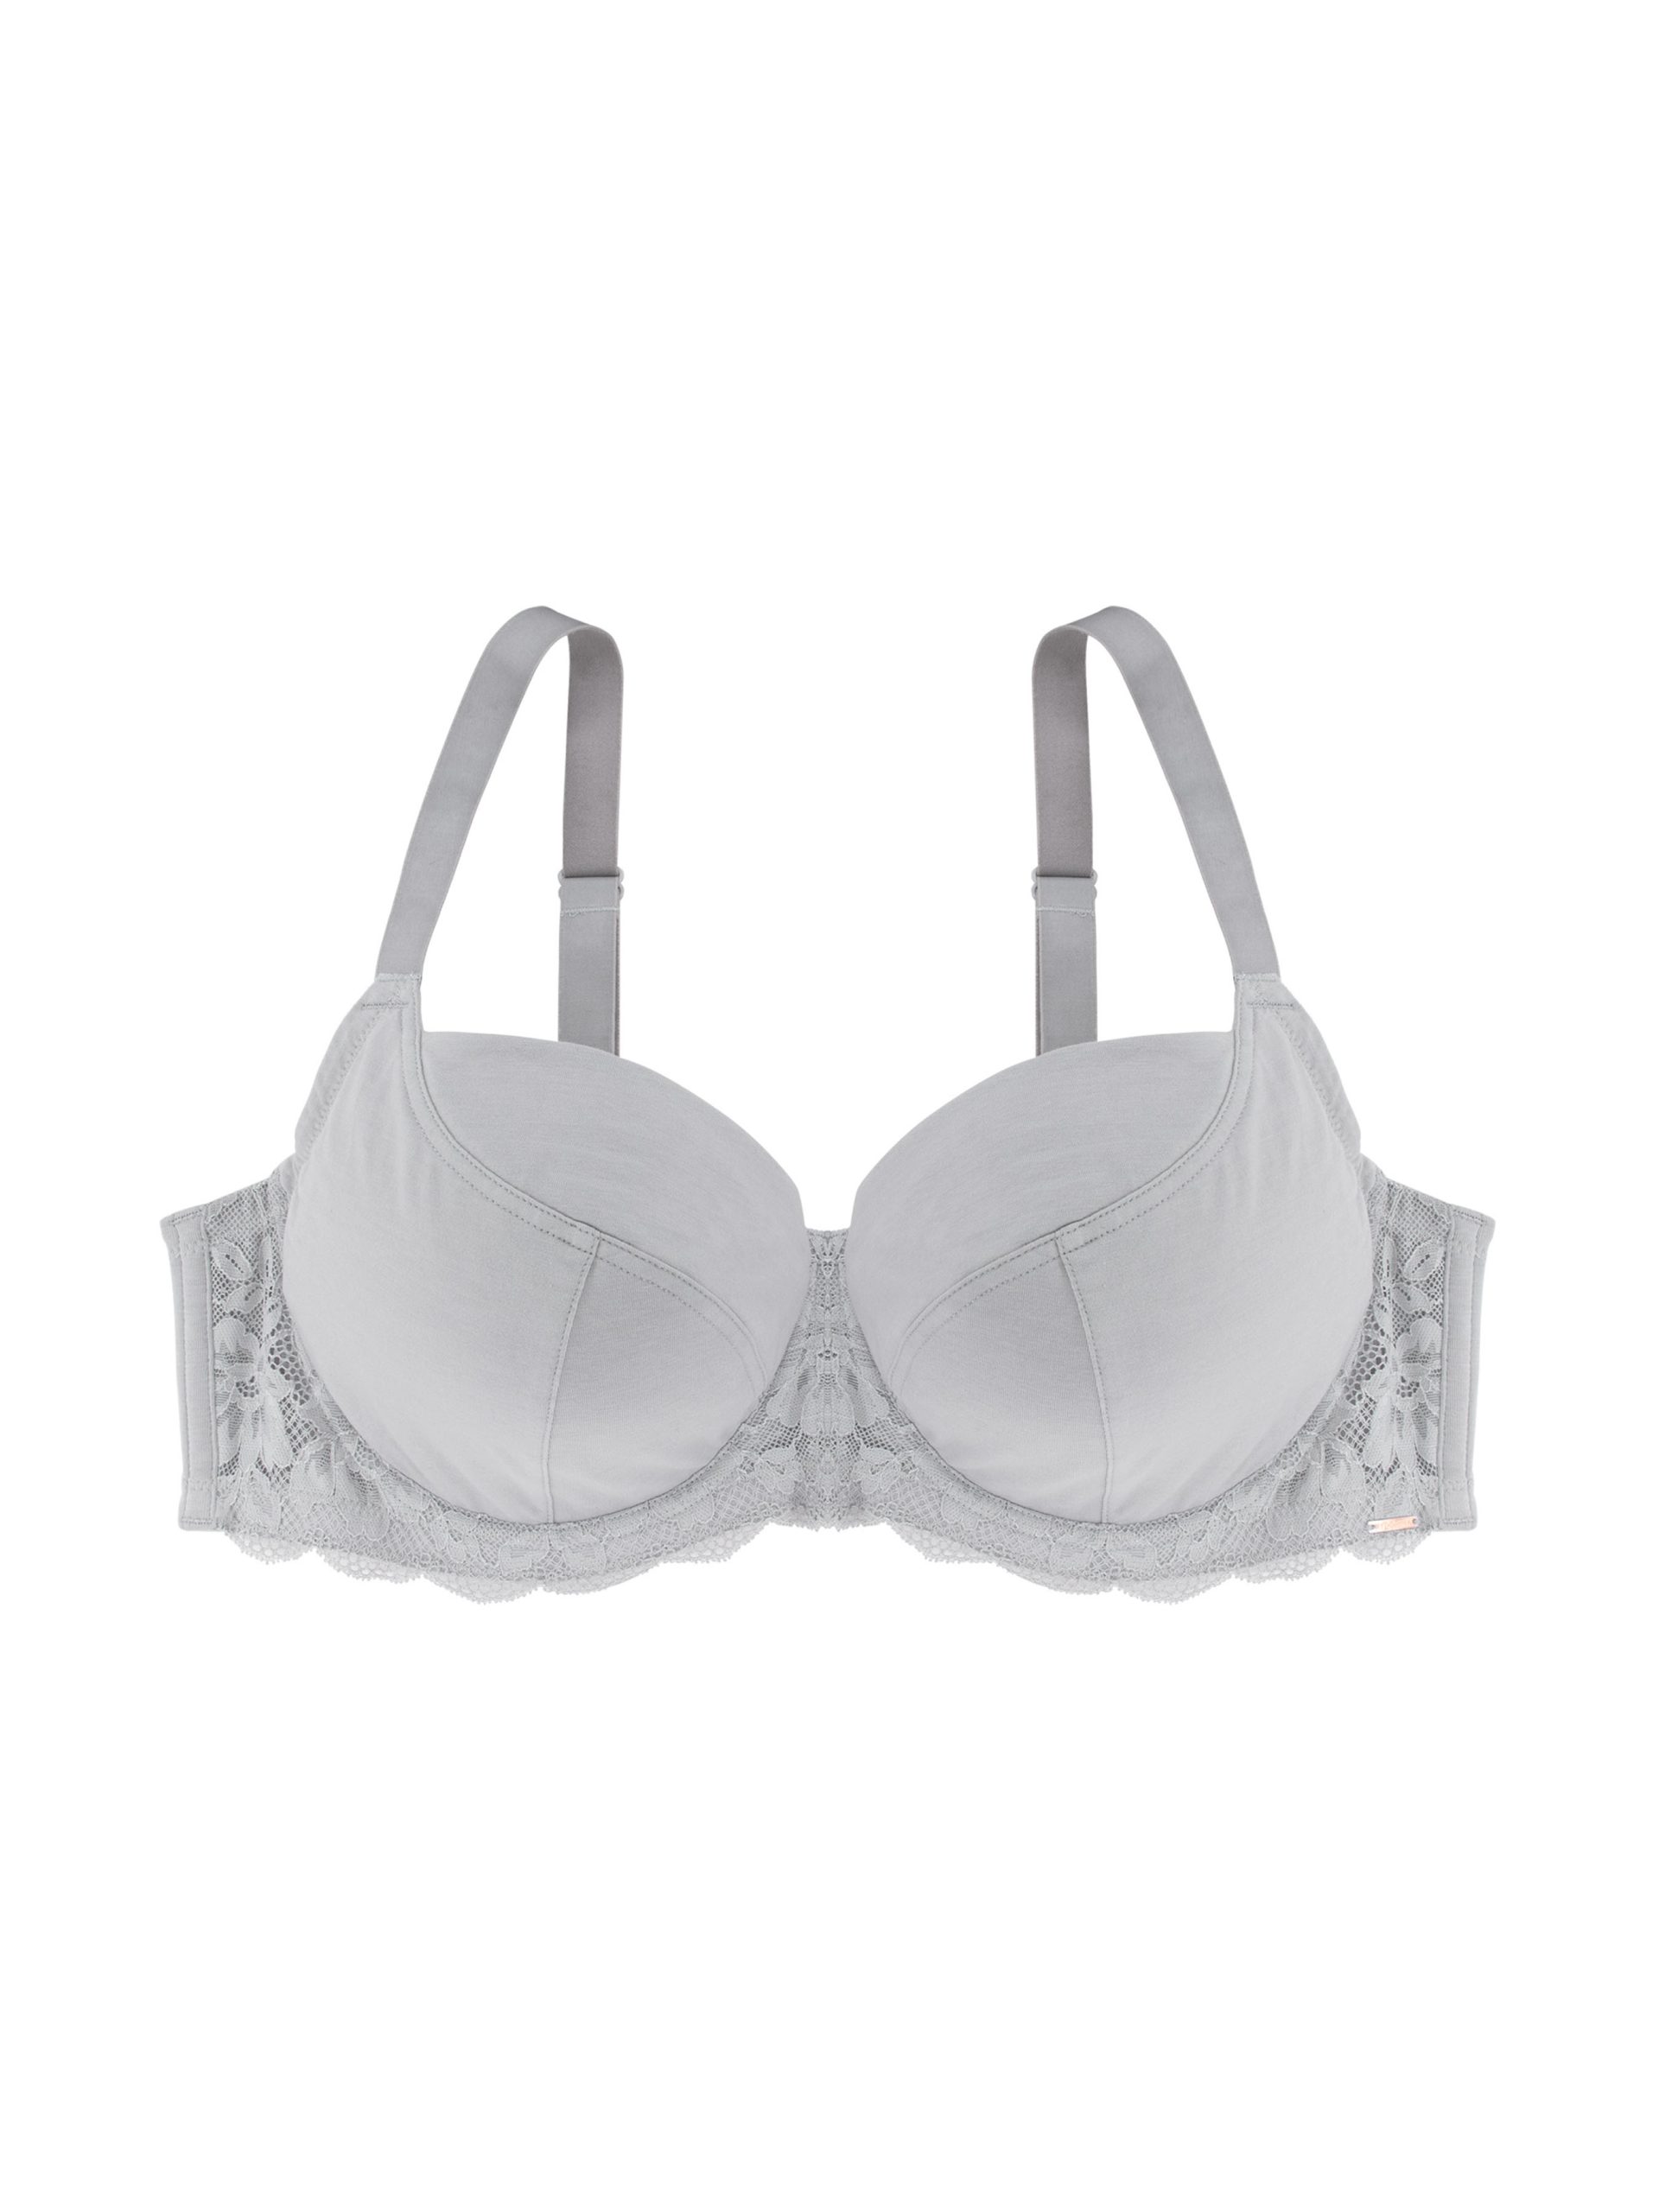 Buy DORINA LEAH Lace Non-Wired Padded Bralette Bra in Grey 2024 Online